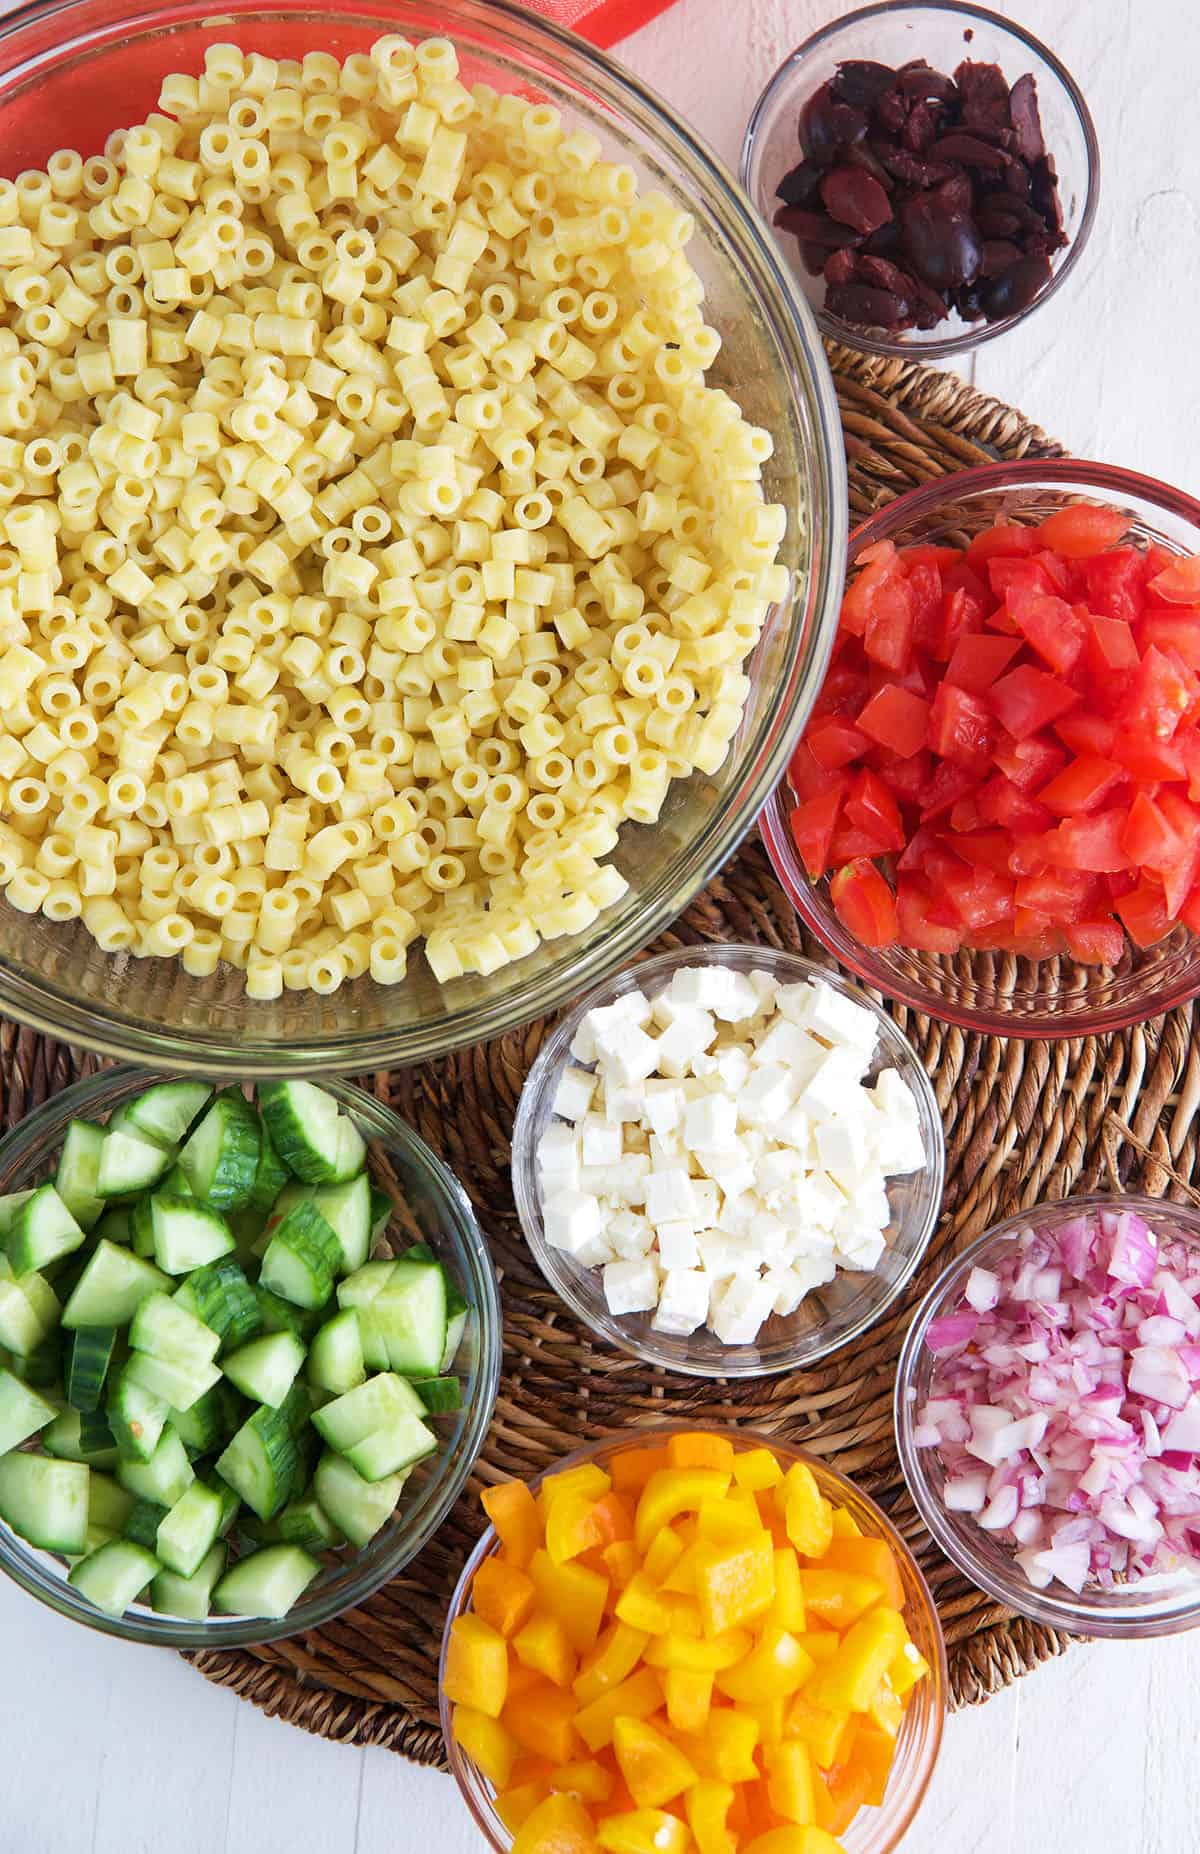 Ingredients for Greek Pasta Salad in glass bowls.